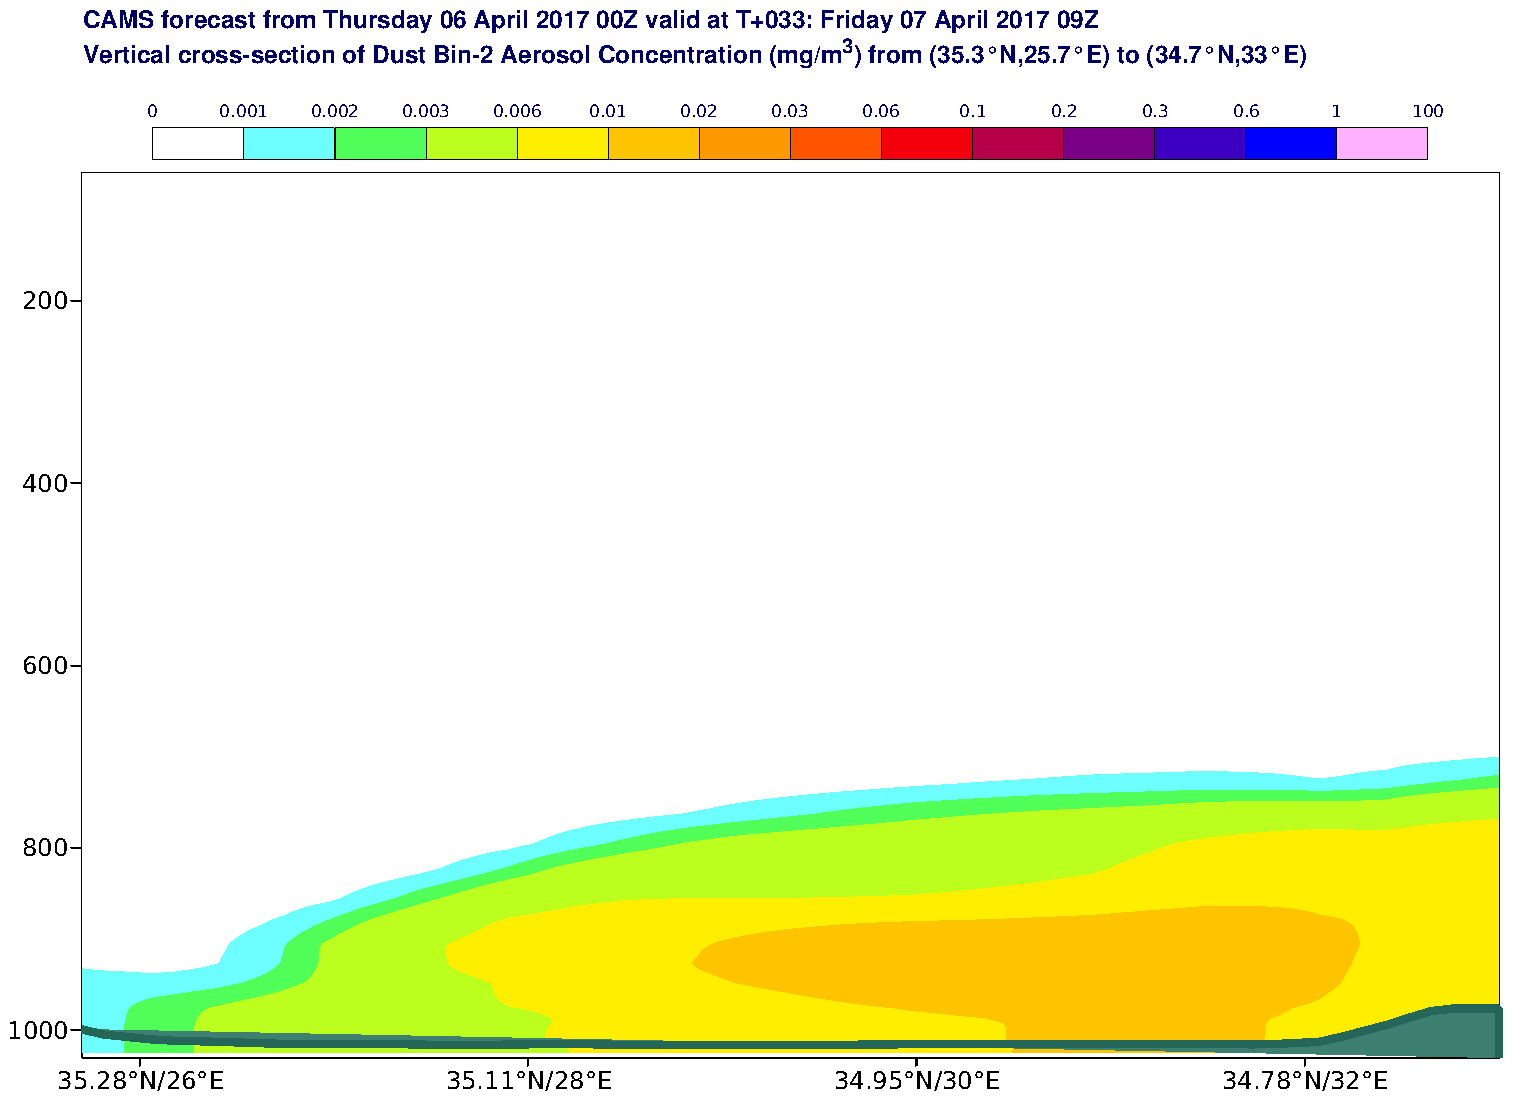 Vertical cross-section of Dust Bin-2 Aerosol Concentration (mg/m3) valid at T33 - 2017-04-07 09:00